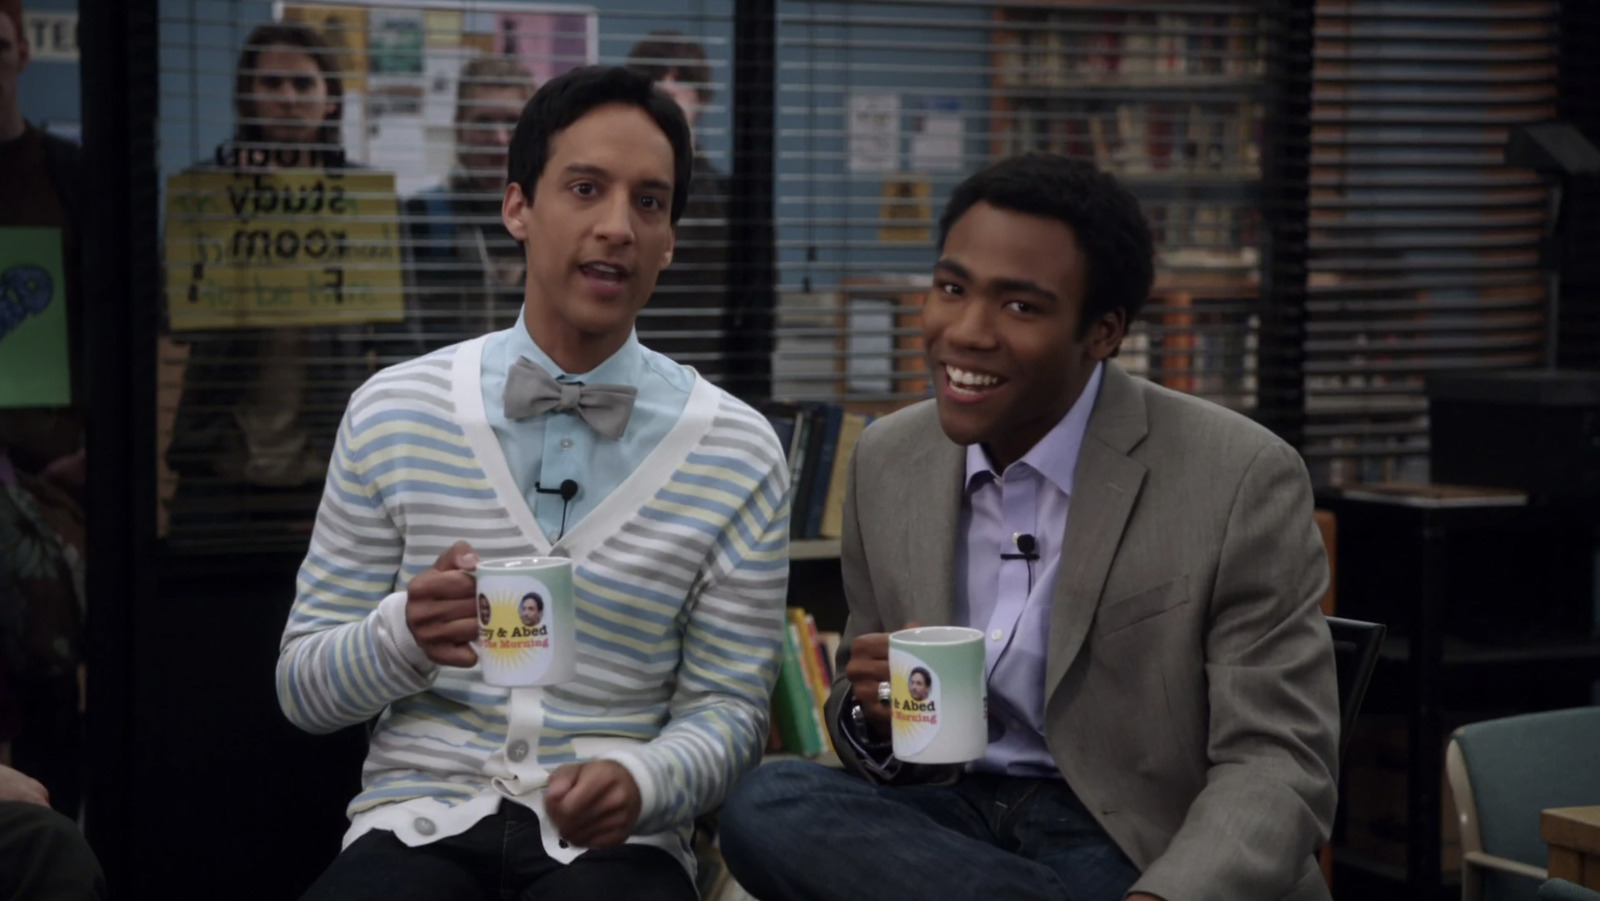 ABED